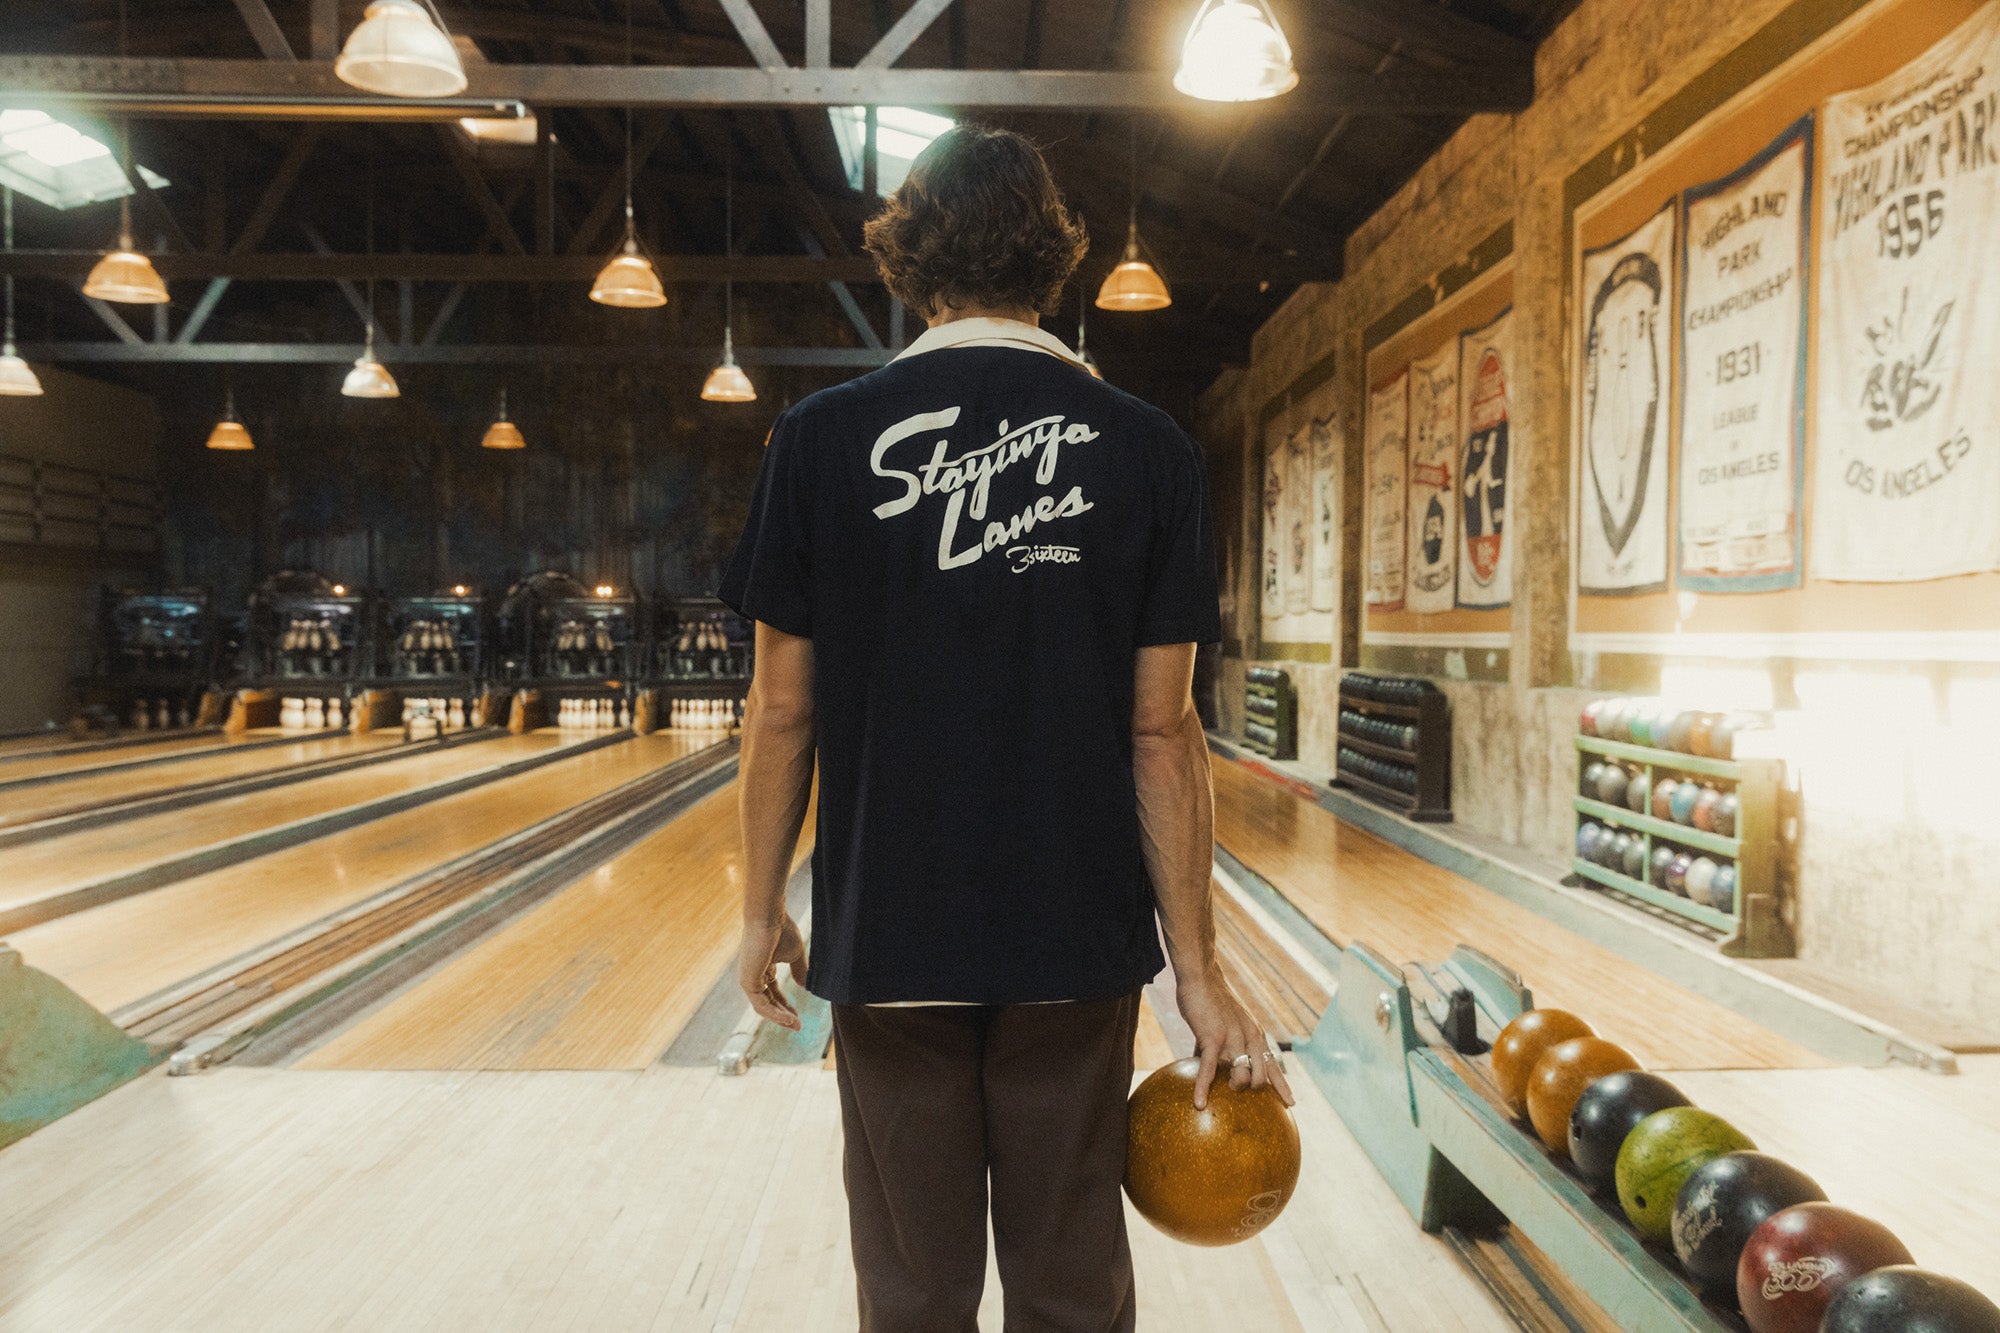 A man stands with a bowling ball in hand in an old bowling alley.